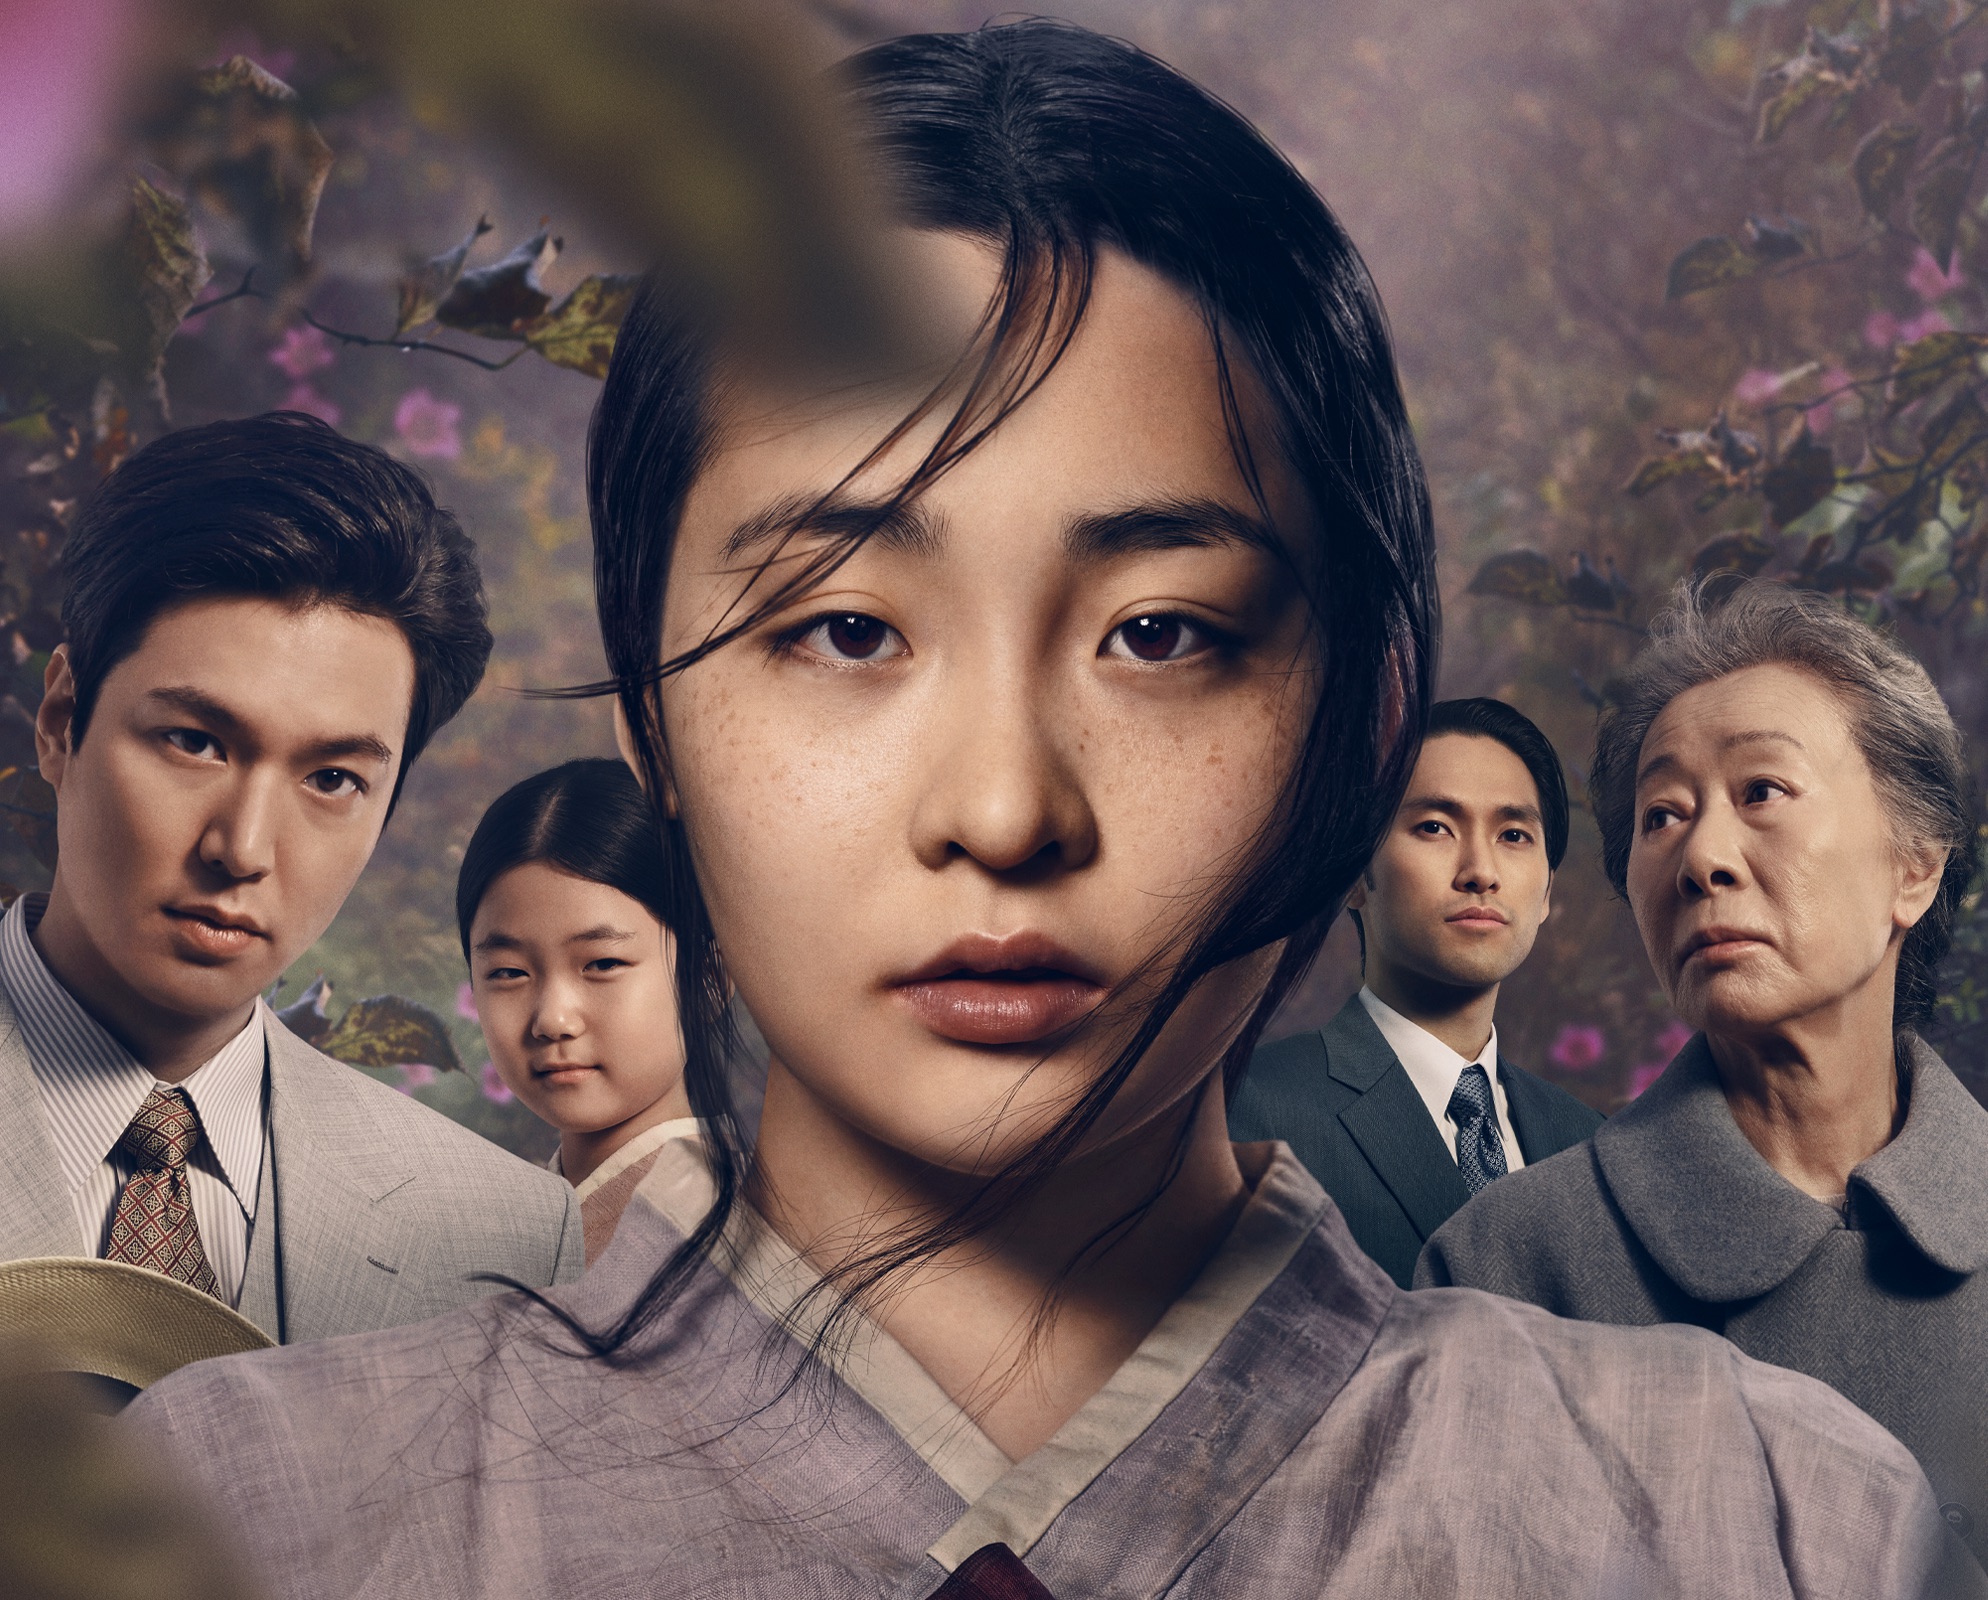 Pachinko Cast - Every Performer and Character in the Apple TV+ Series